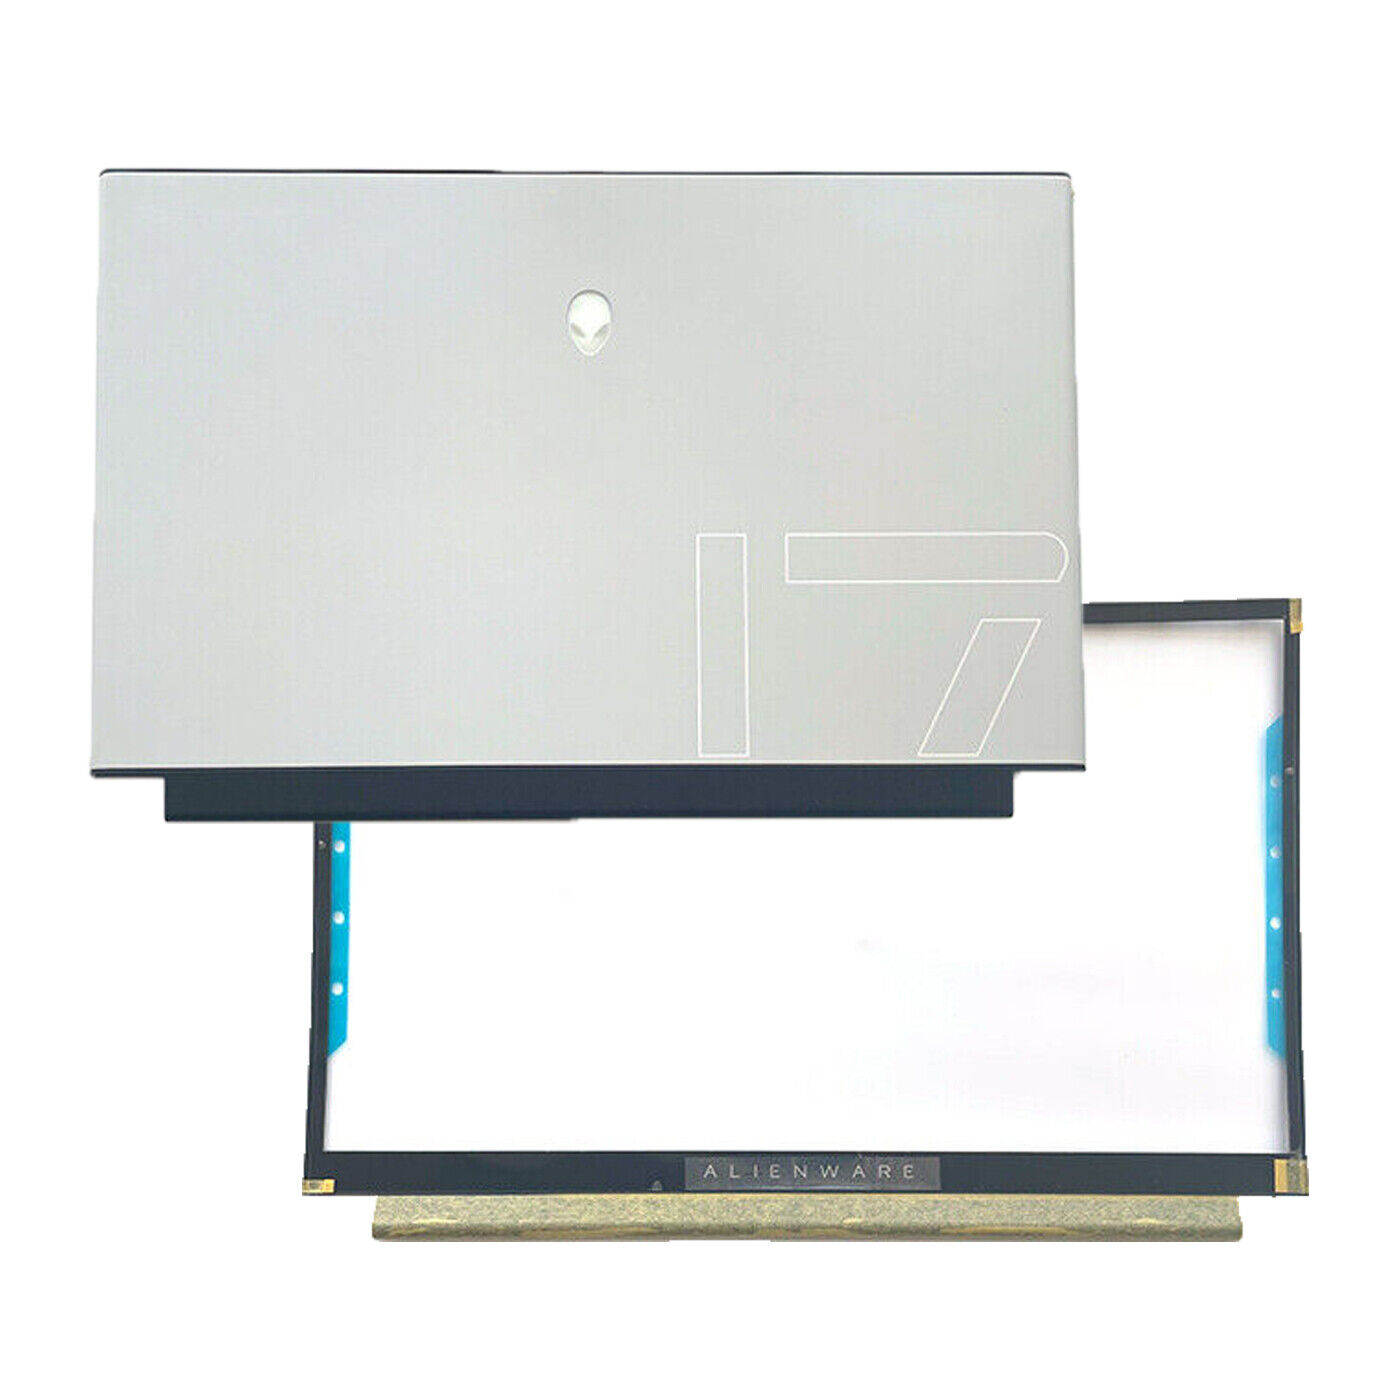 0R0CJC 0DY3C0 LCD Back Cover + Front Bezel For Dell Alienware M17 R3 17.3